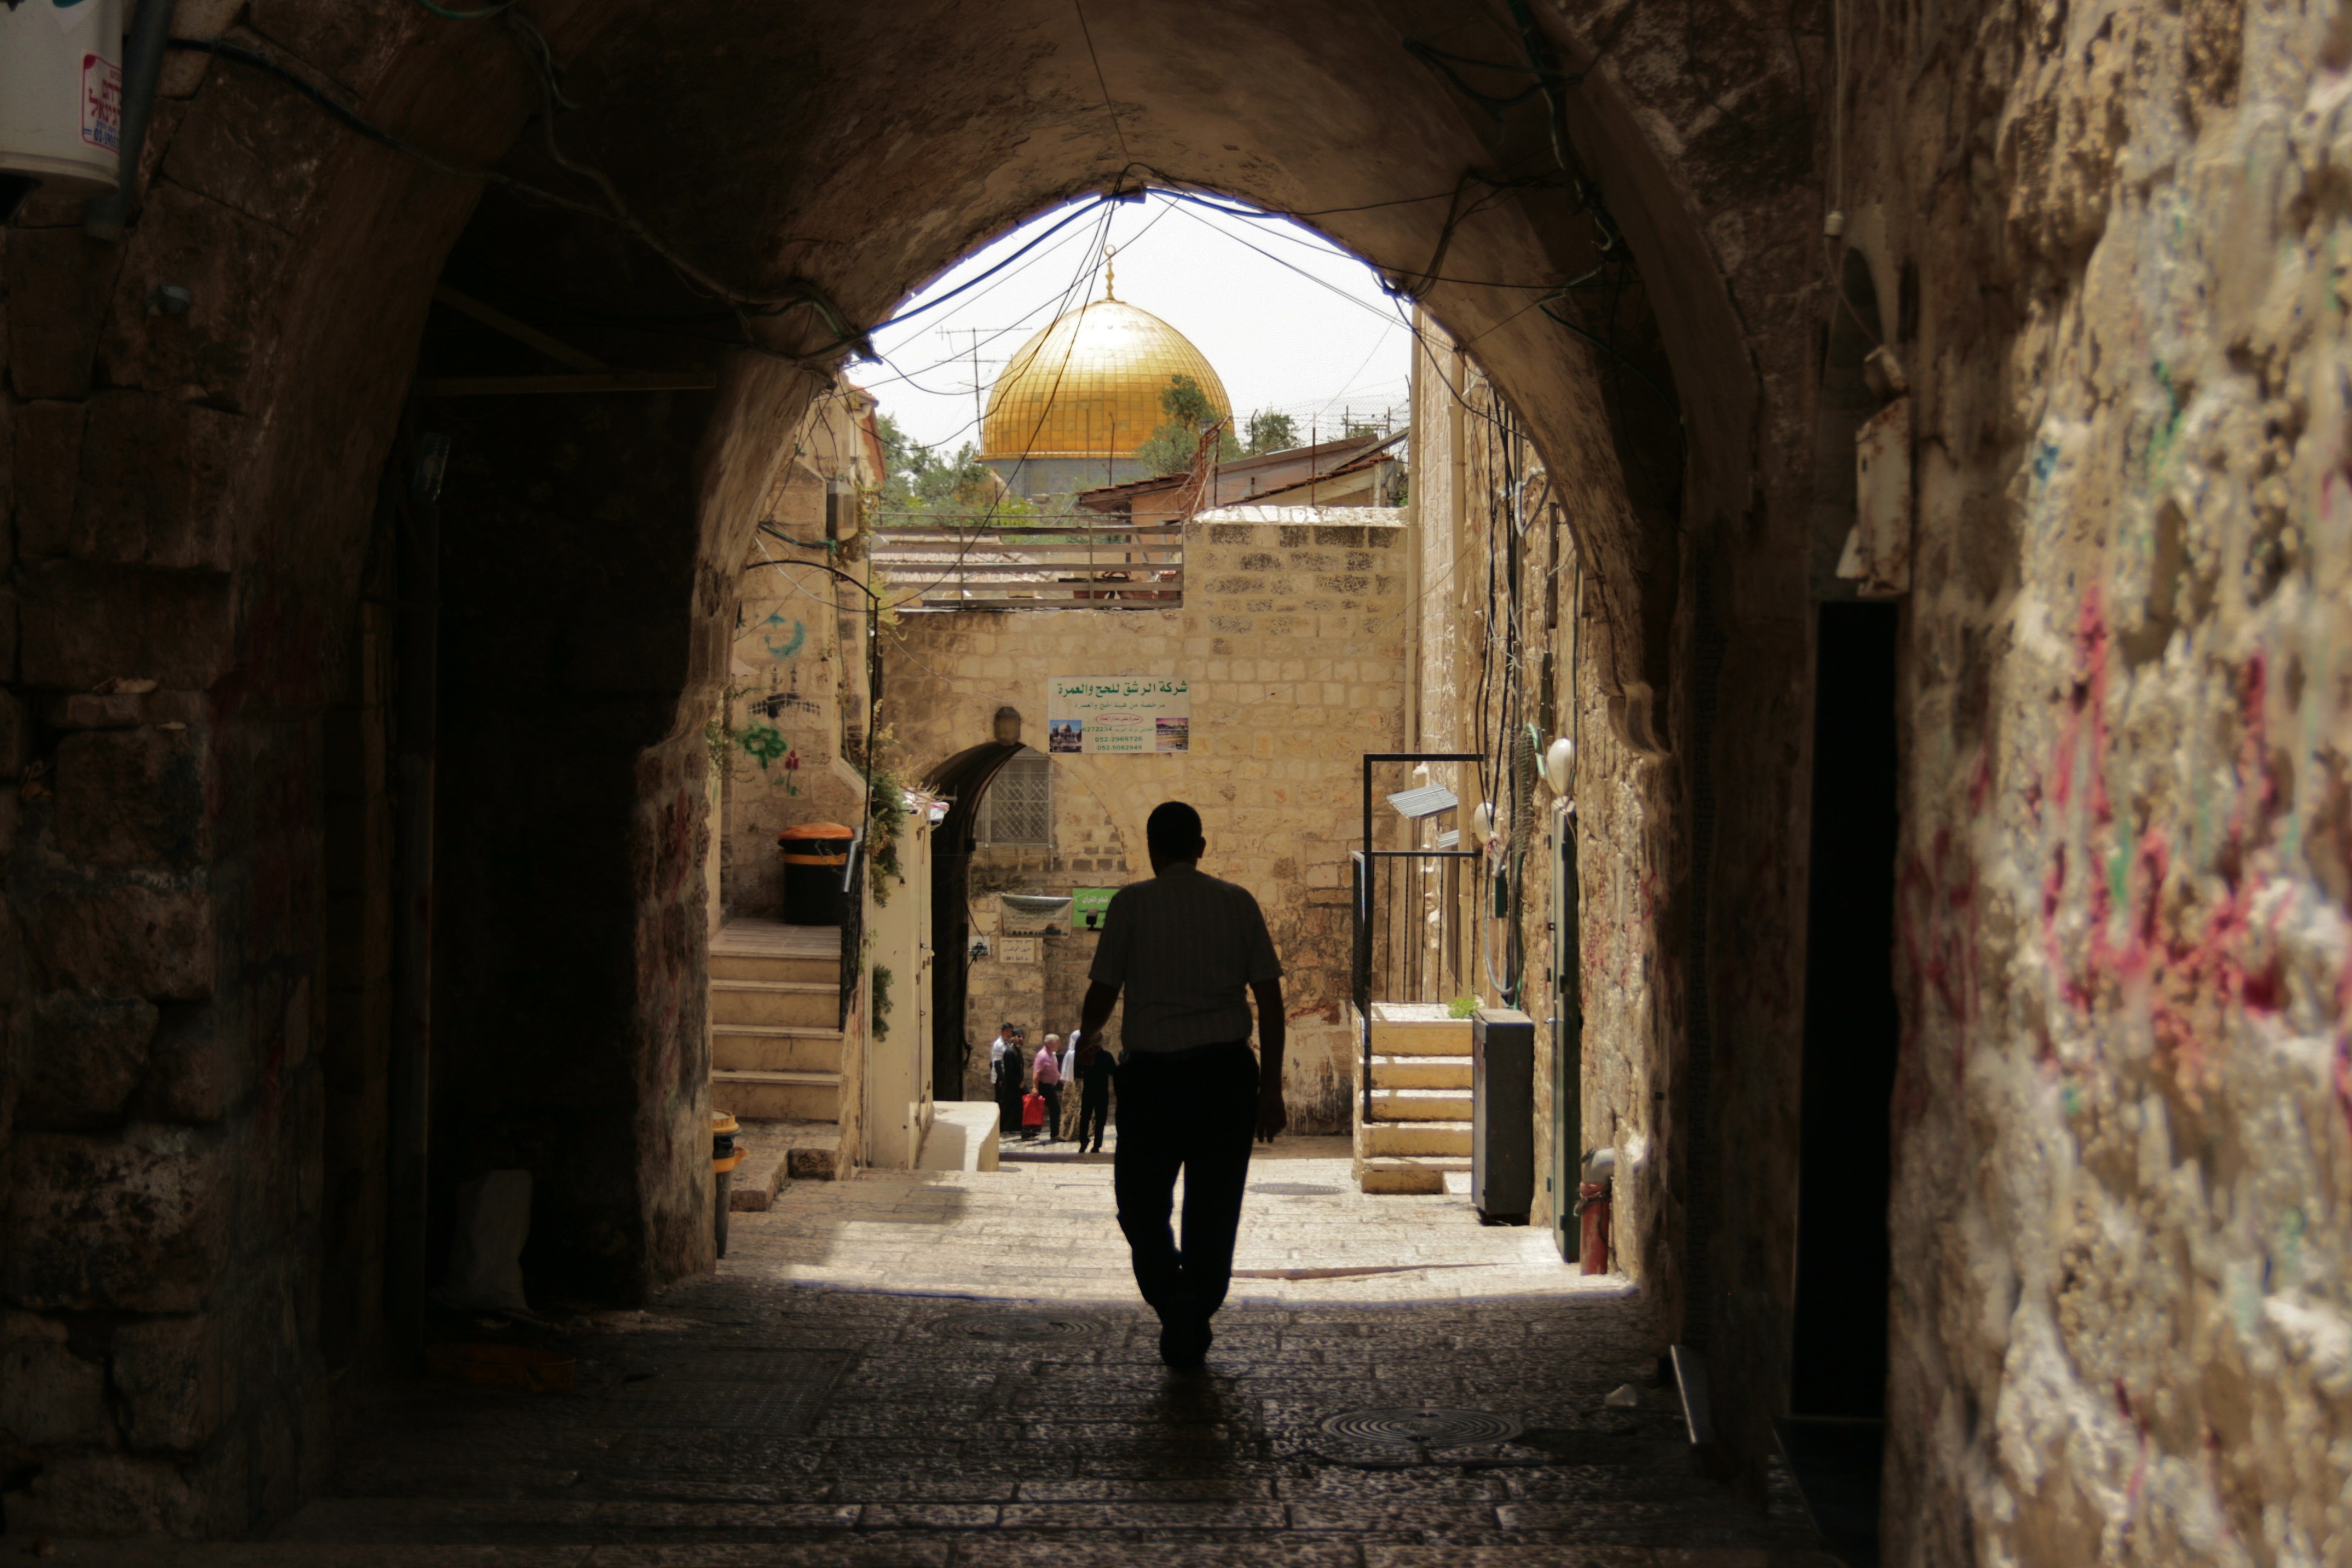 A person in shadow walking through into the light with the golden dome of a mosque shining in the sunlight